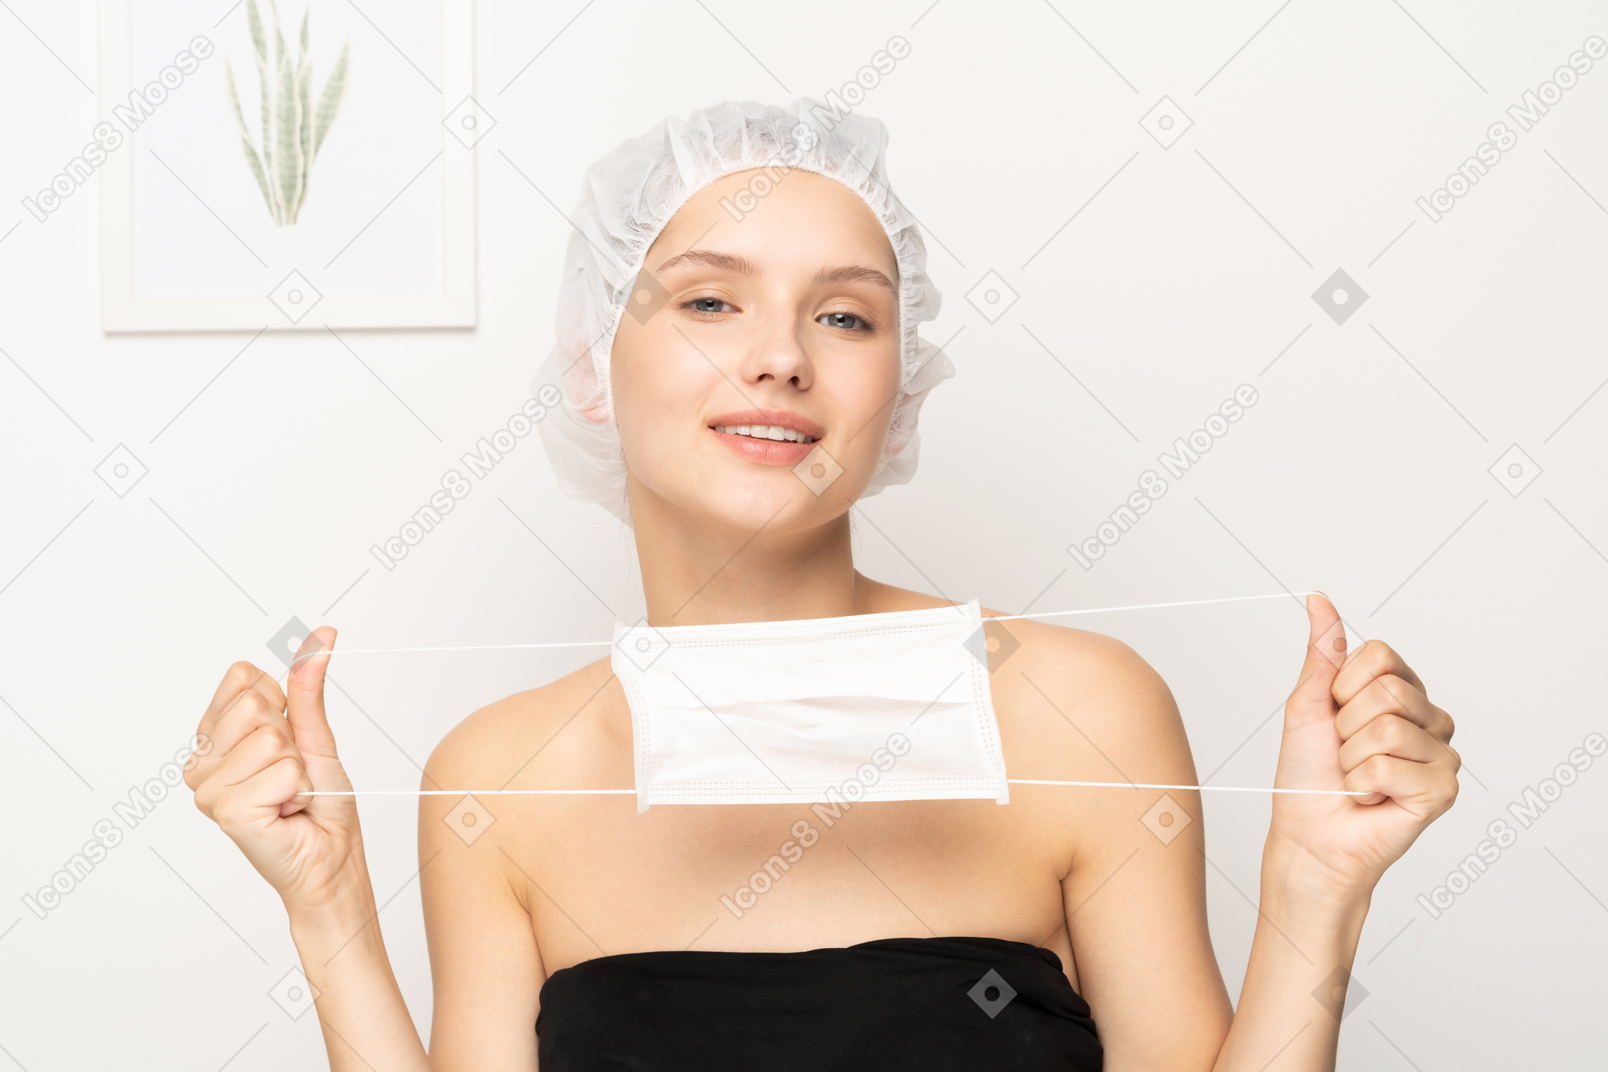 Woman standing and stretching mask